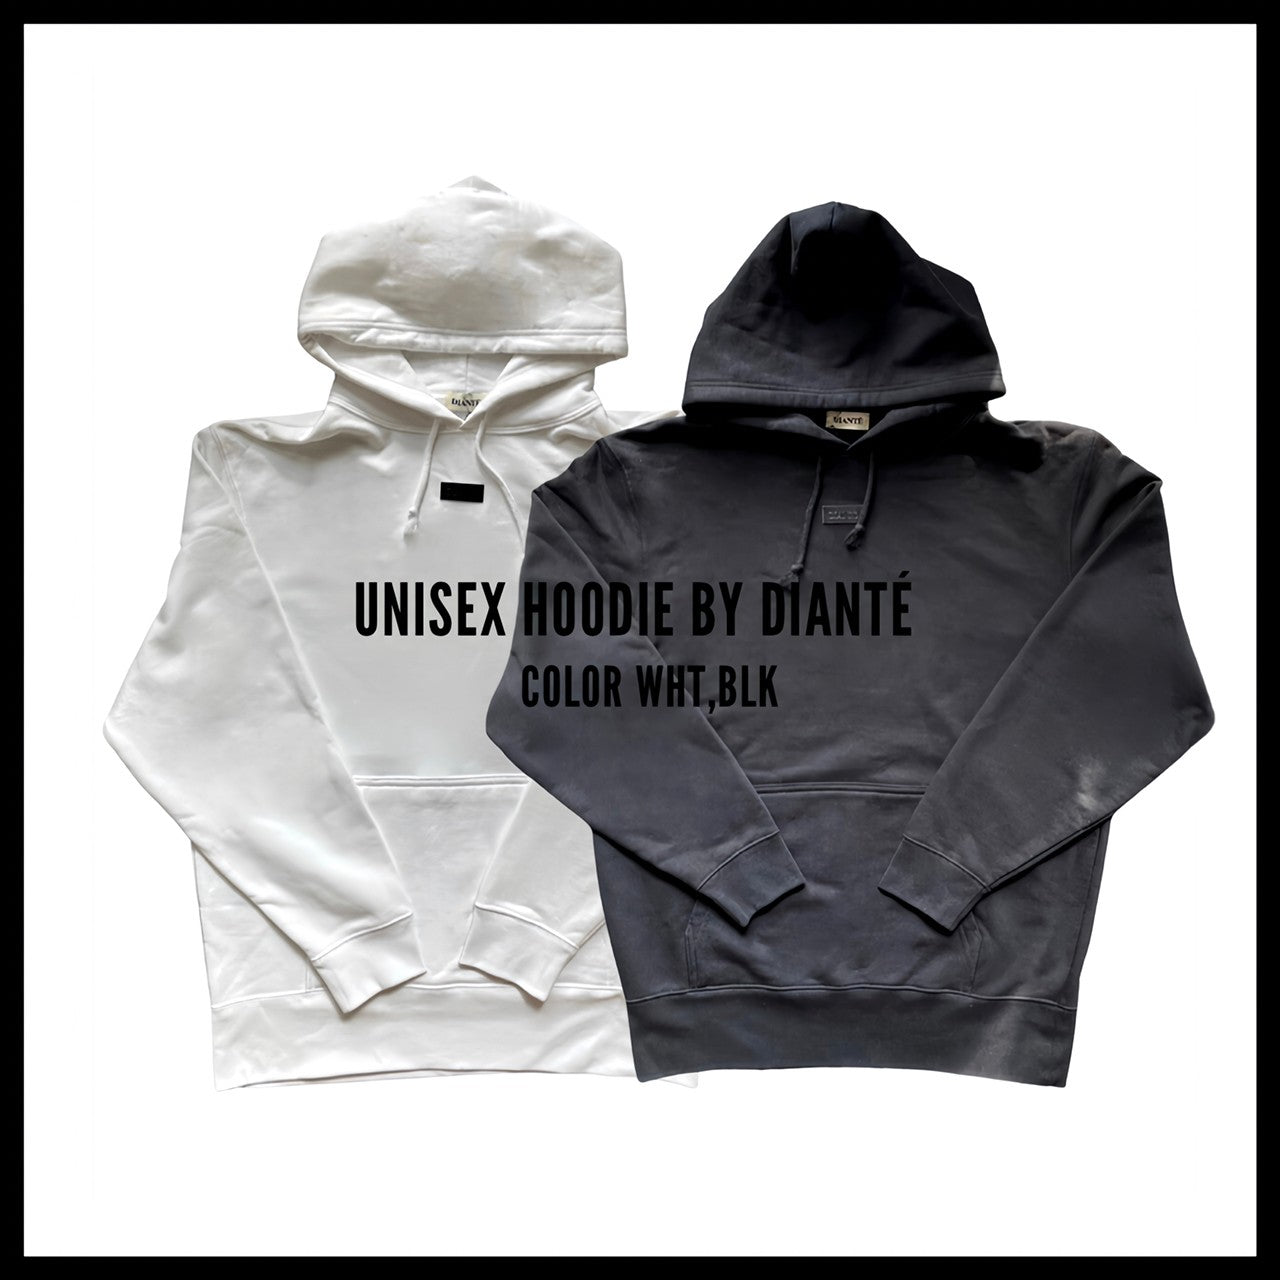 Unisex hoodie by diante | DIANTÉ (ディアンテ)公式通販サイト